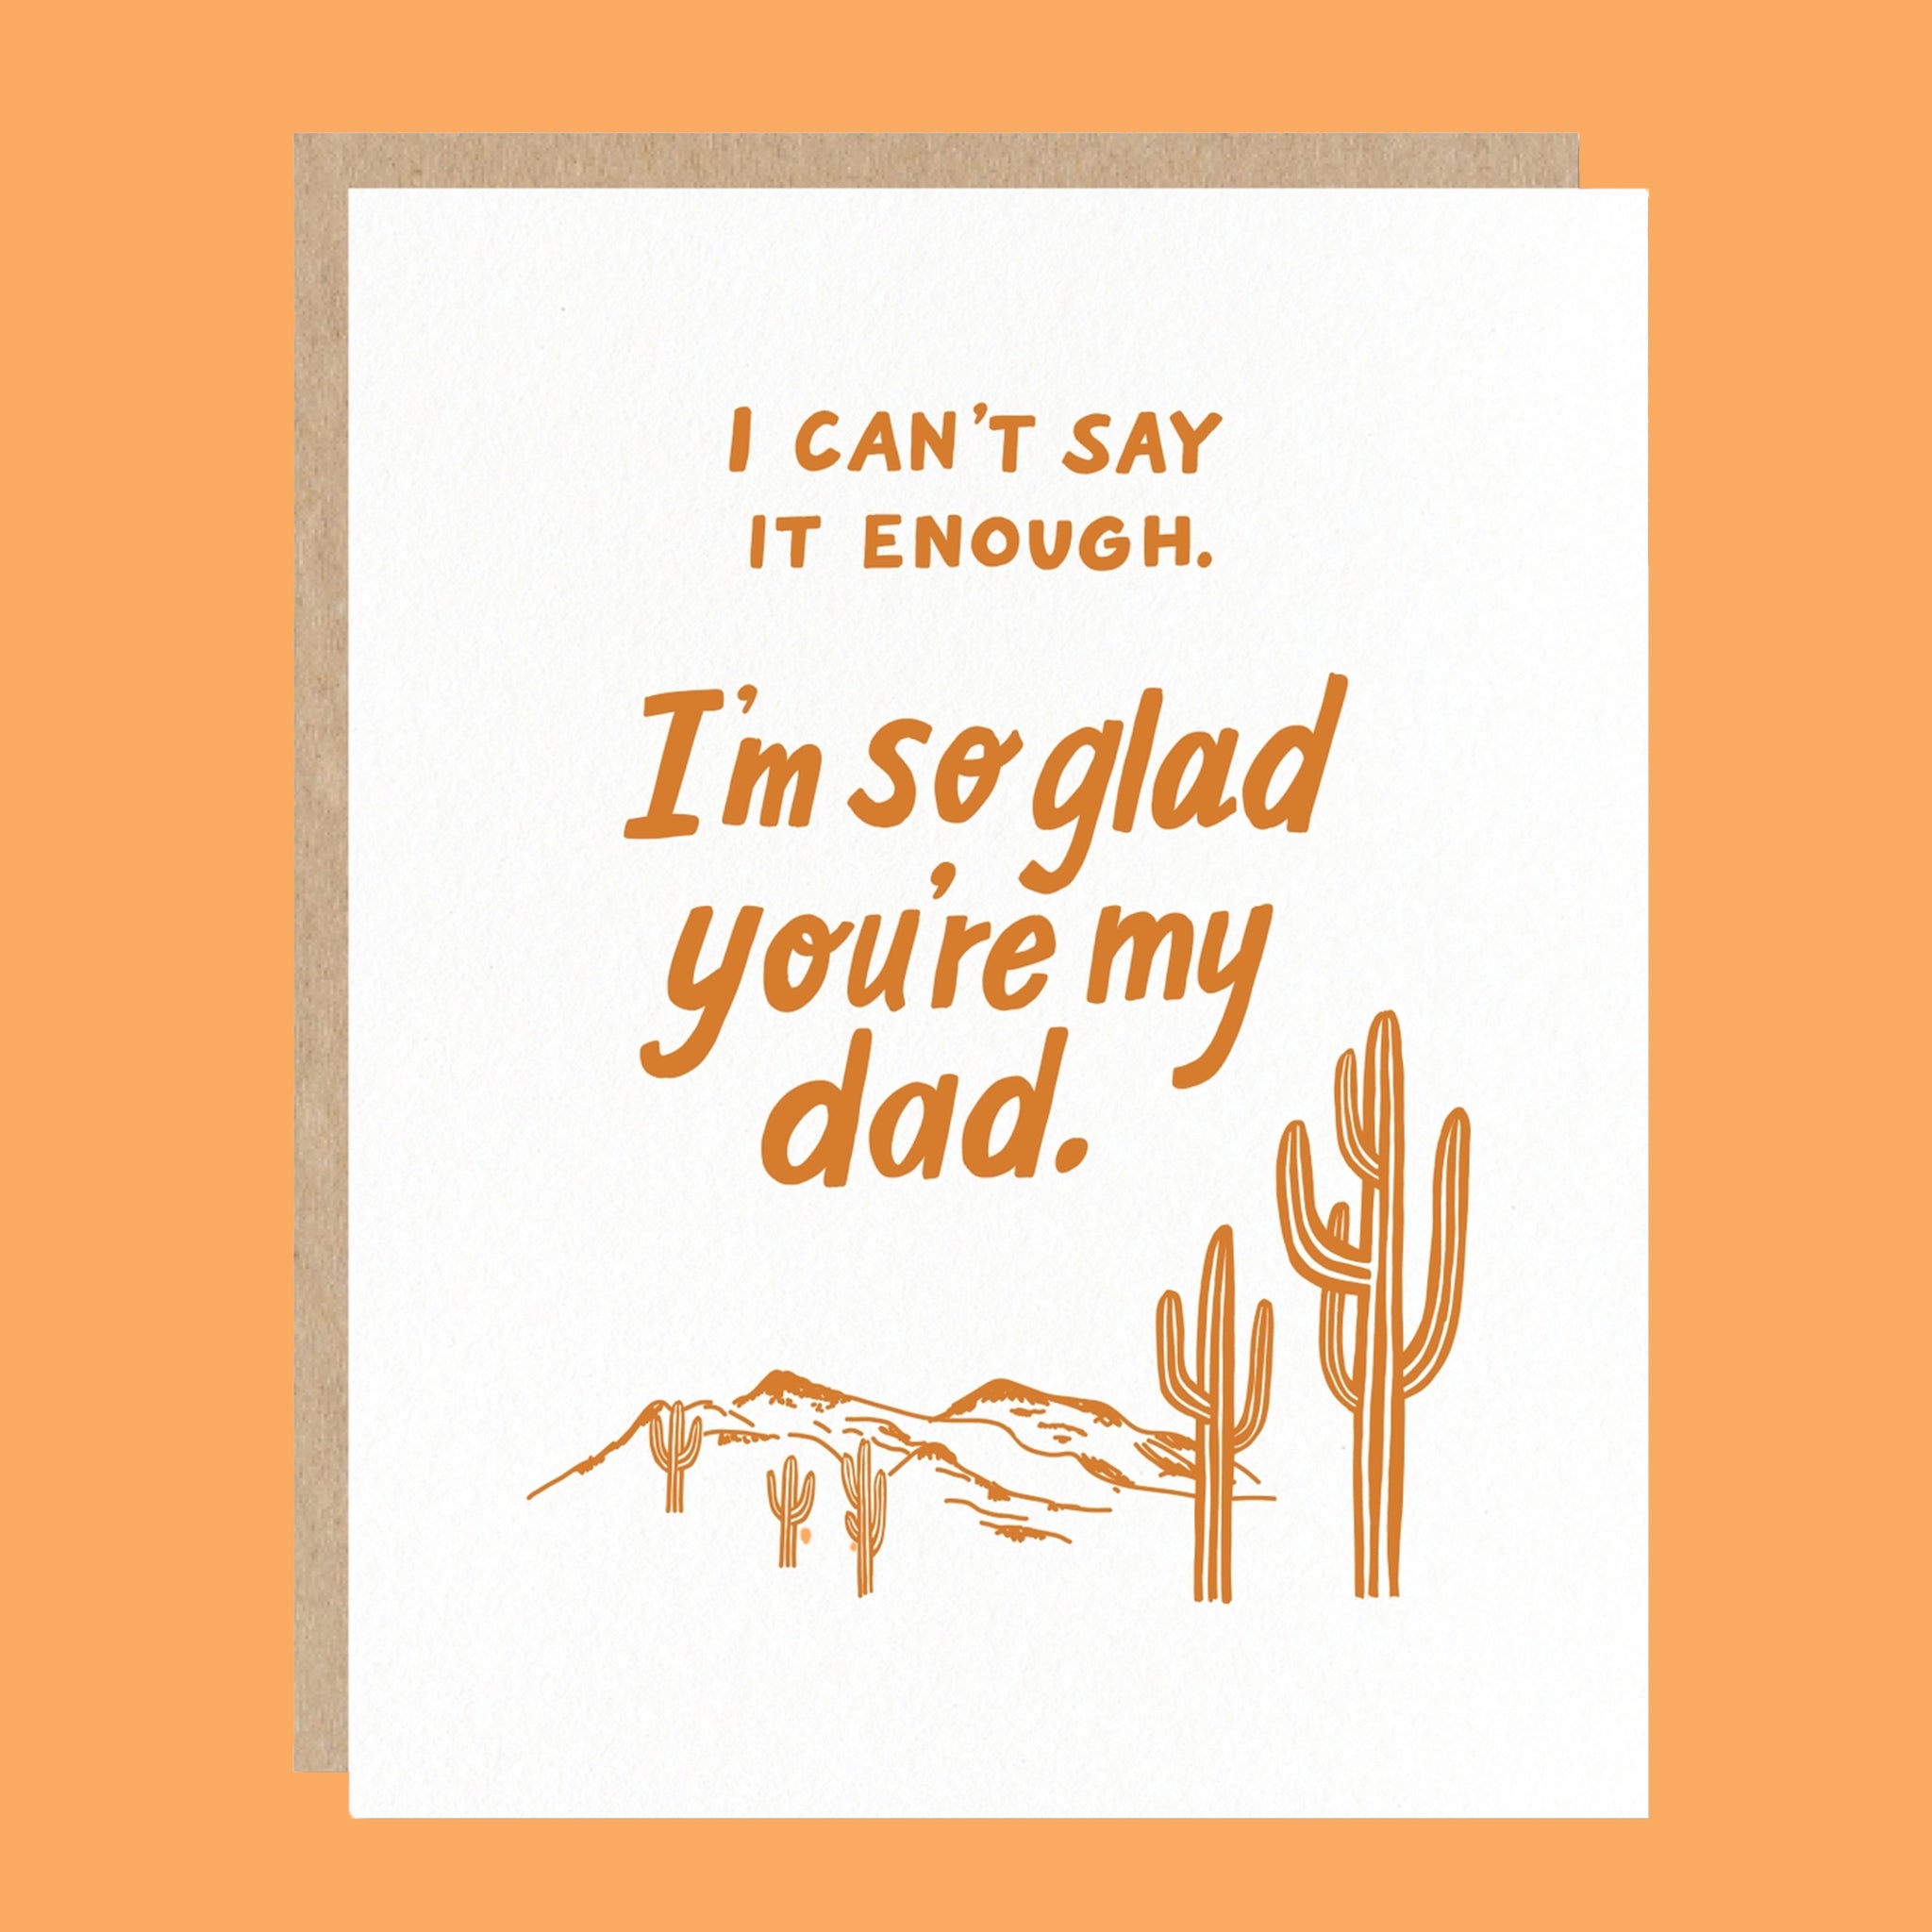 On an orange background is a white card with text on the front that reads, "I Can't Say Enough. I'm so glad you're my dad." along with an illustration of desert mountains and cacti. 